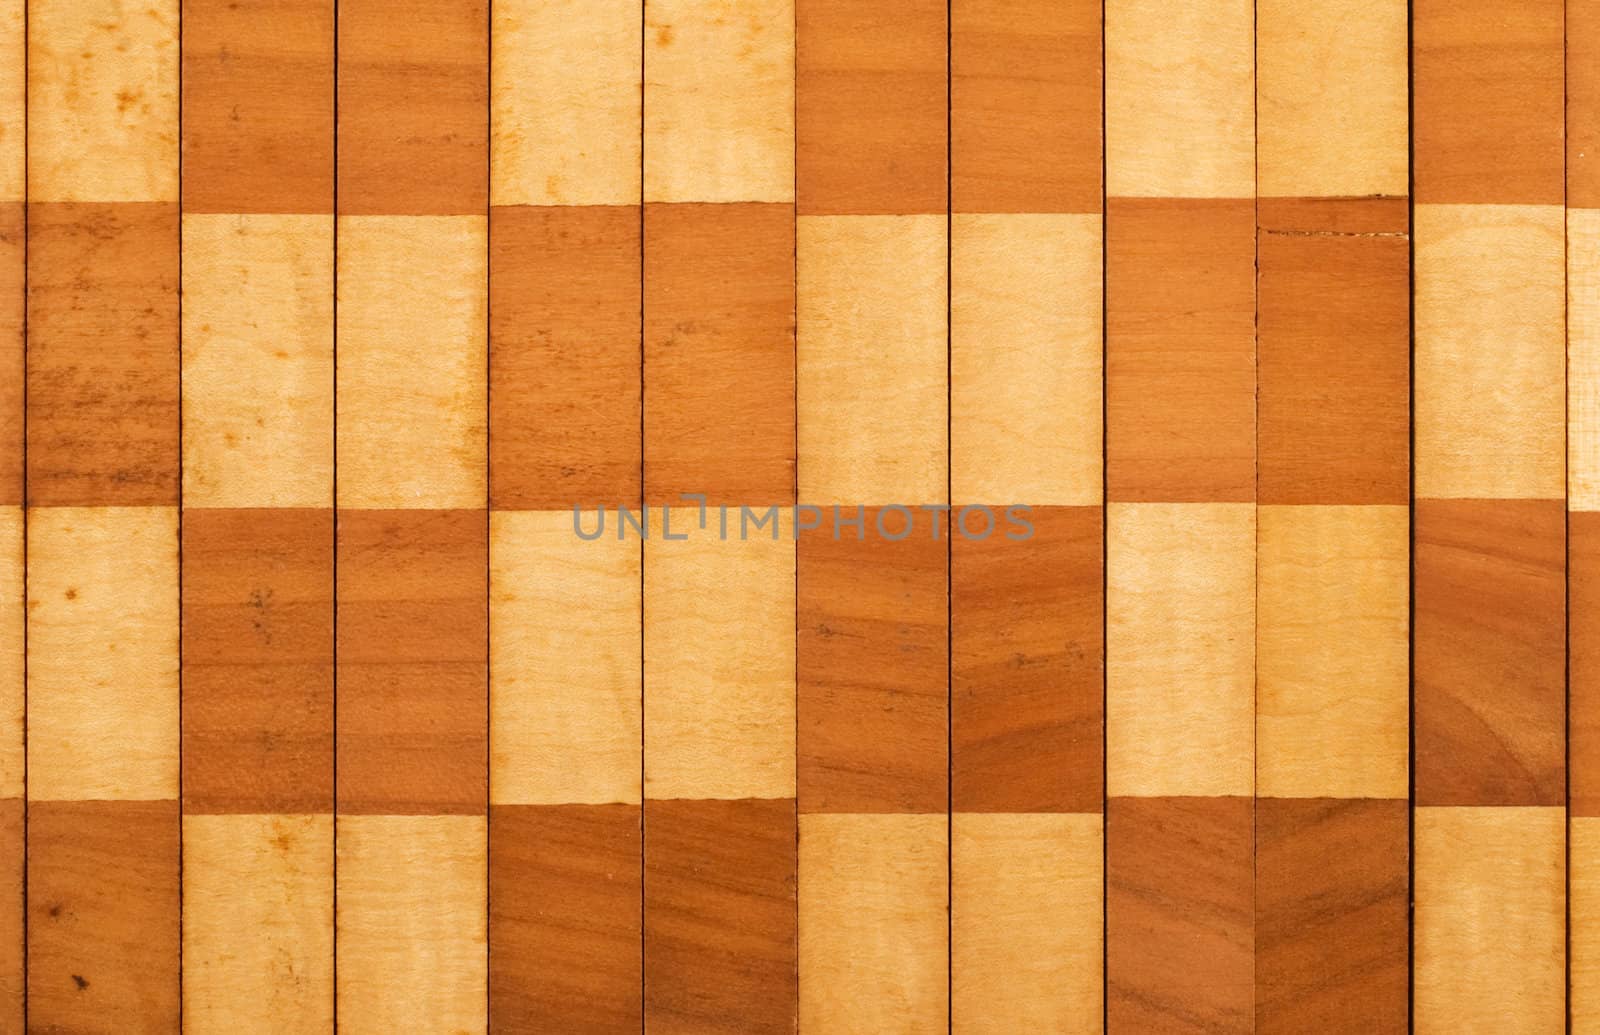 Chequered wooden surface